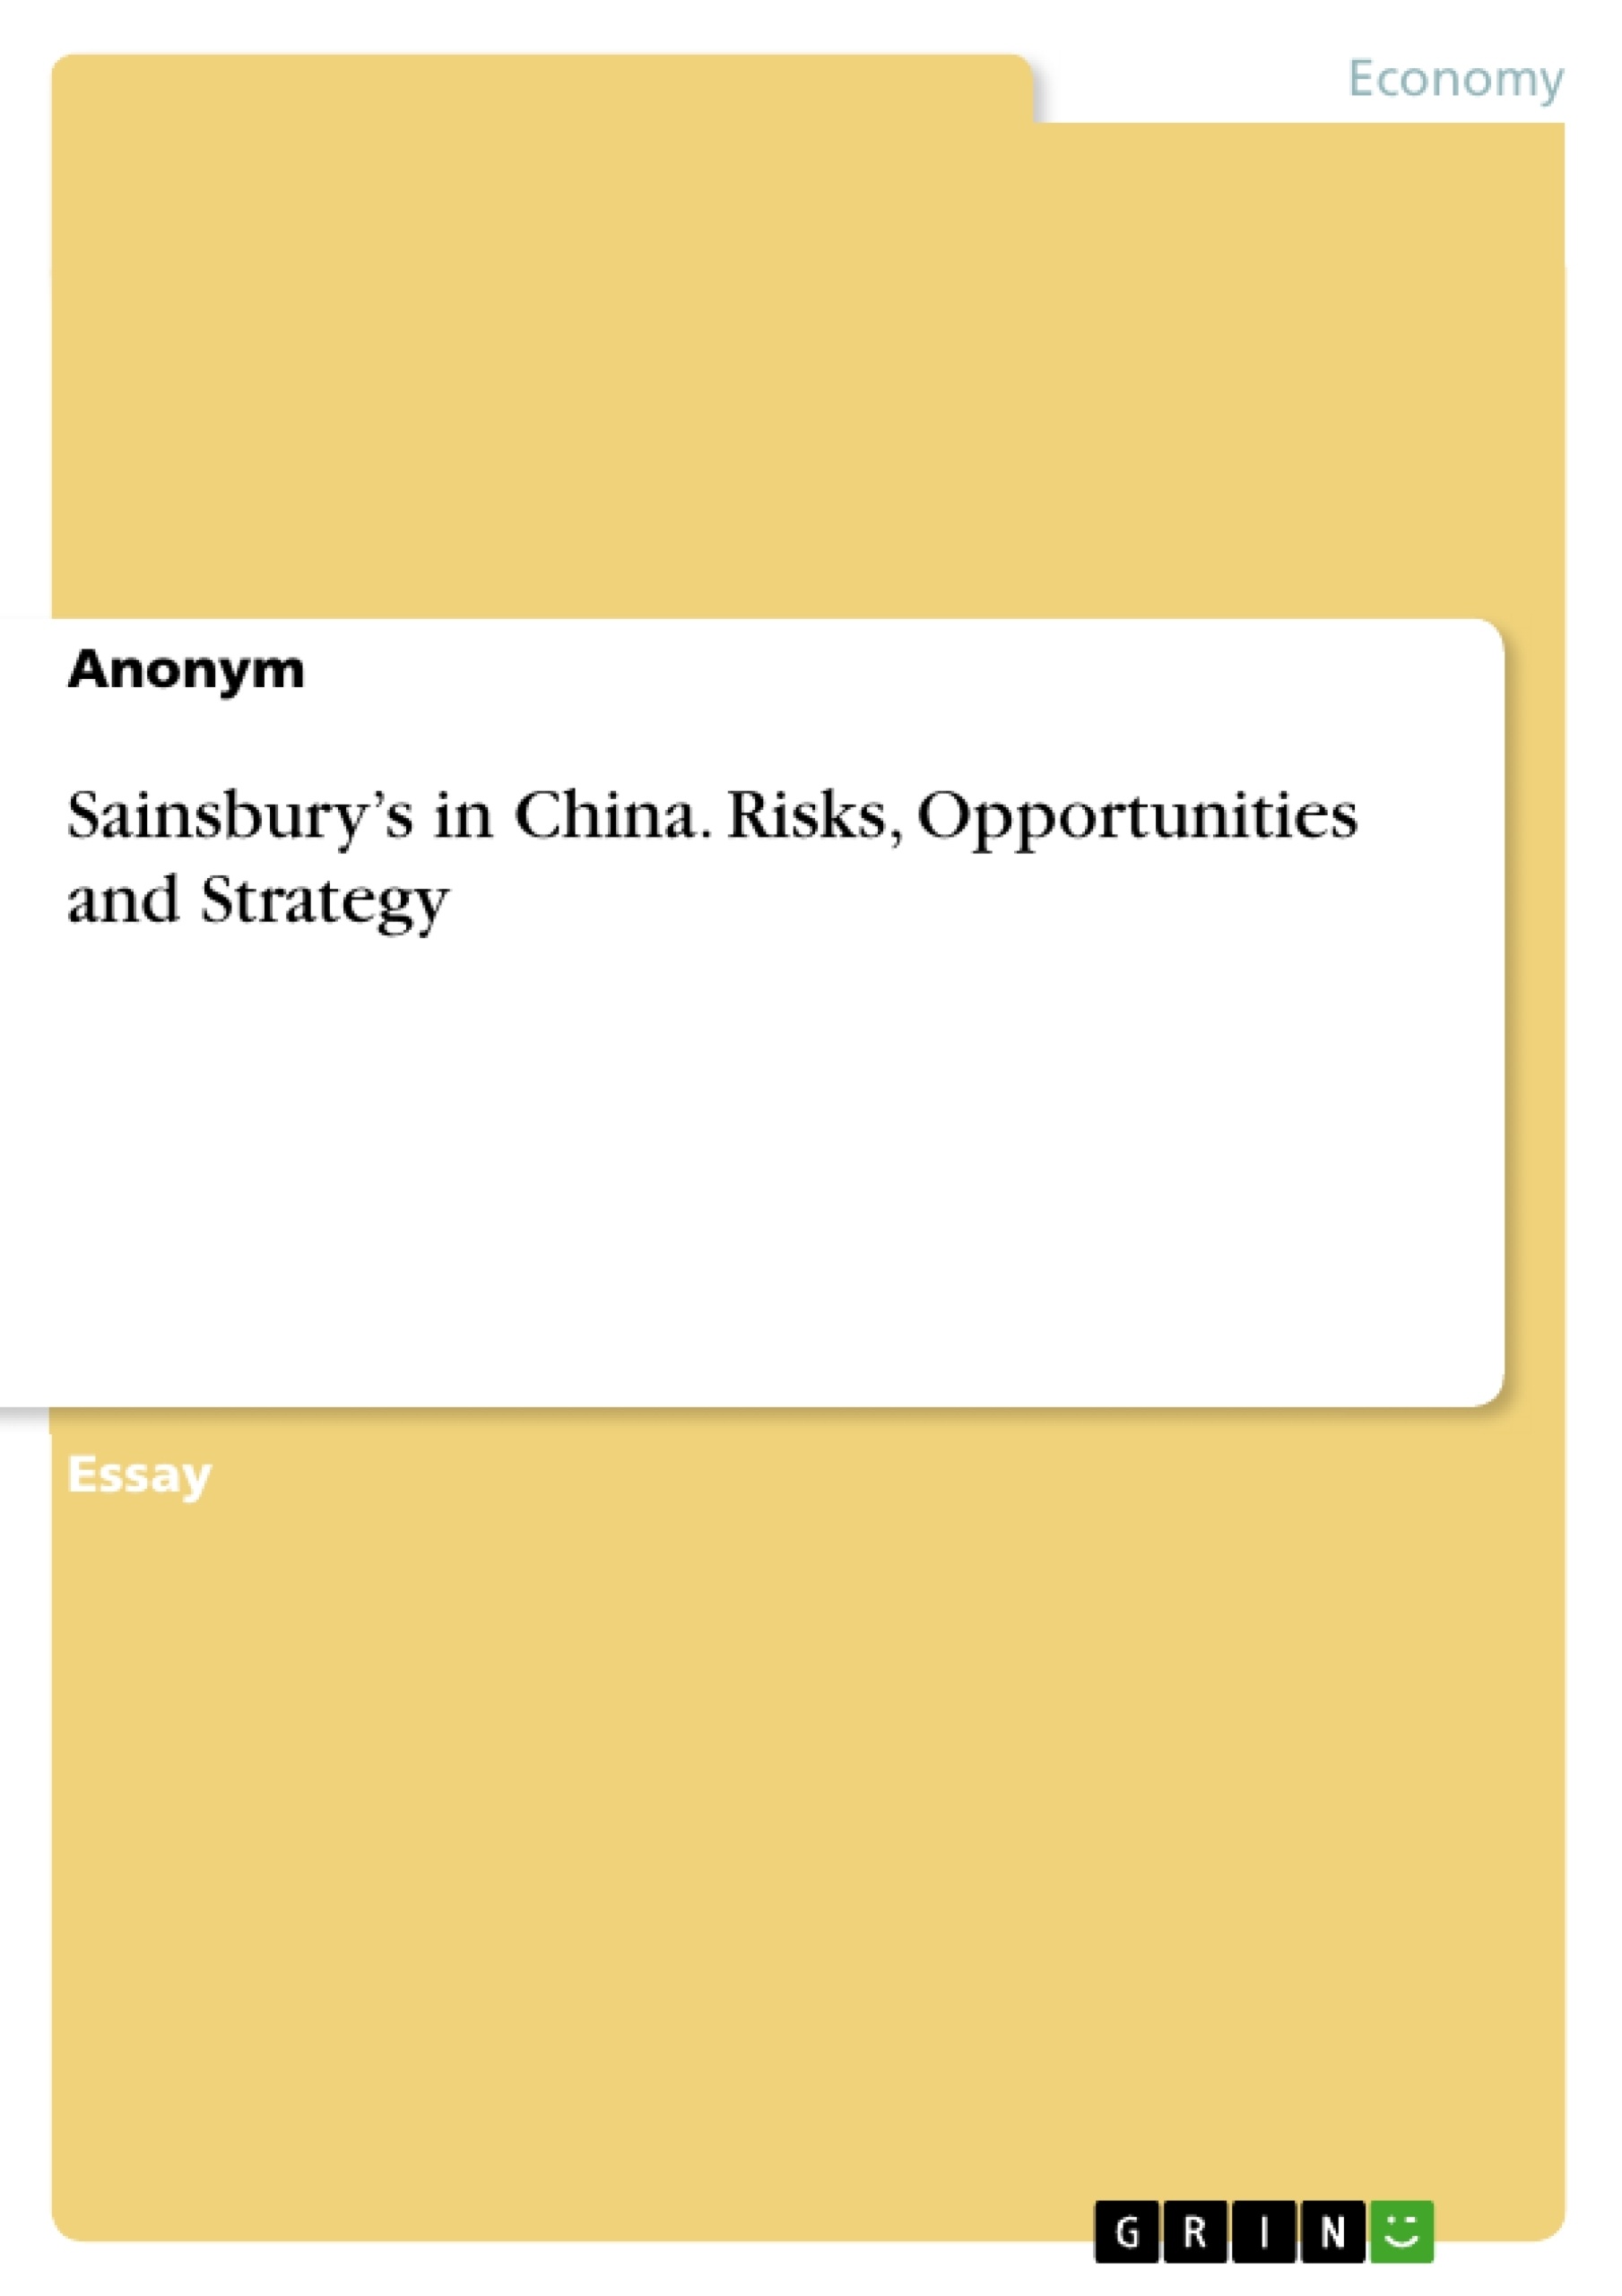 Title: Sainsbury’s in China. Risks, Opportunities and Strategy